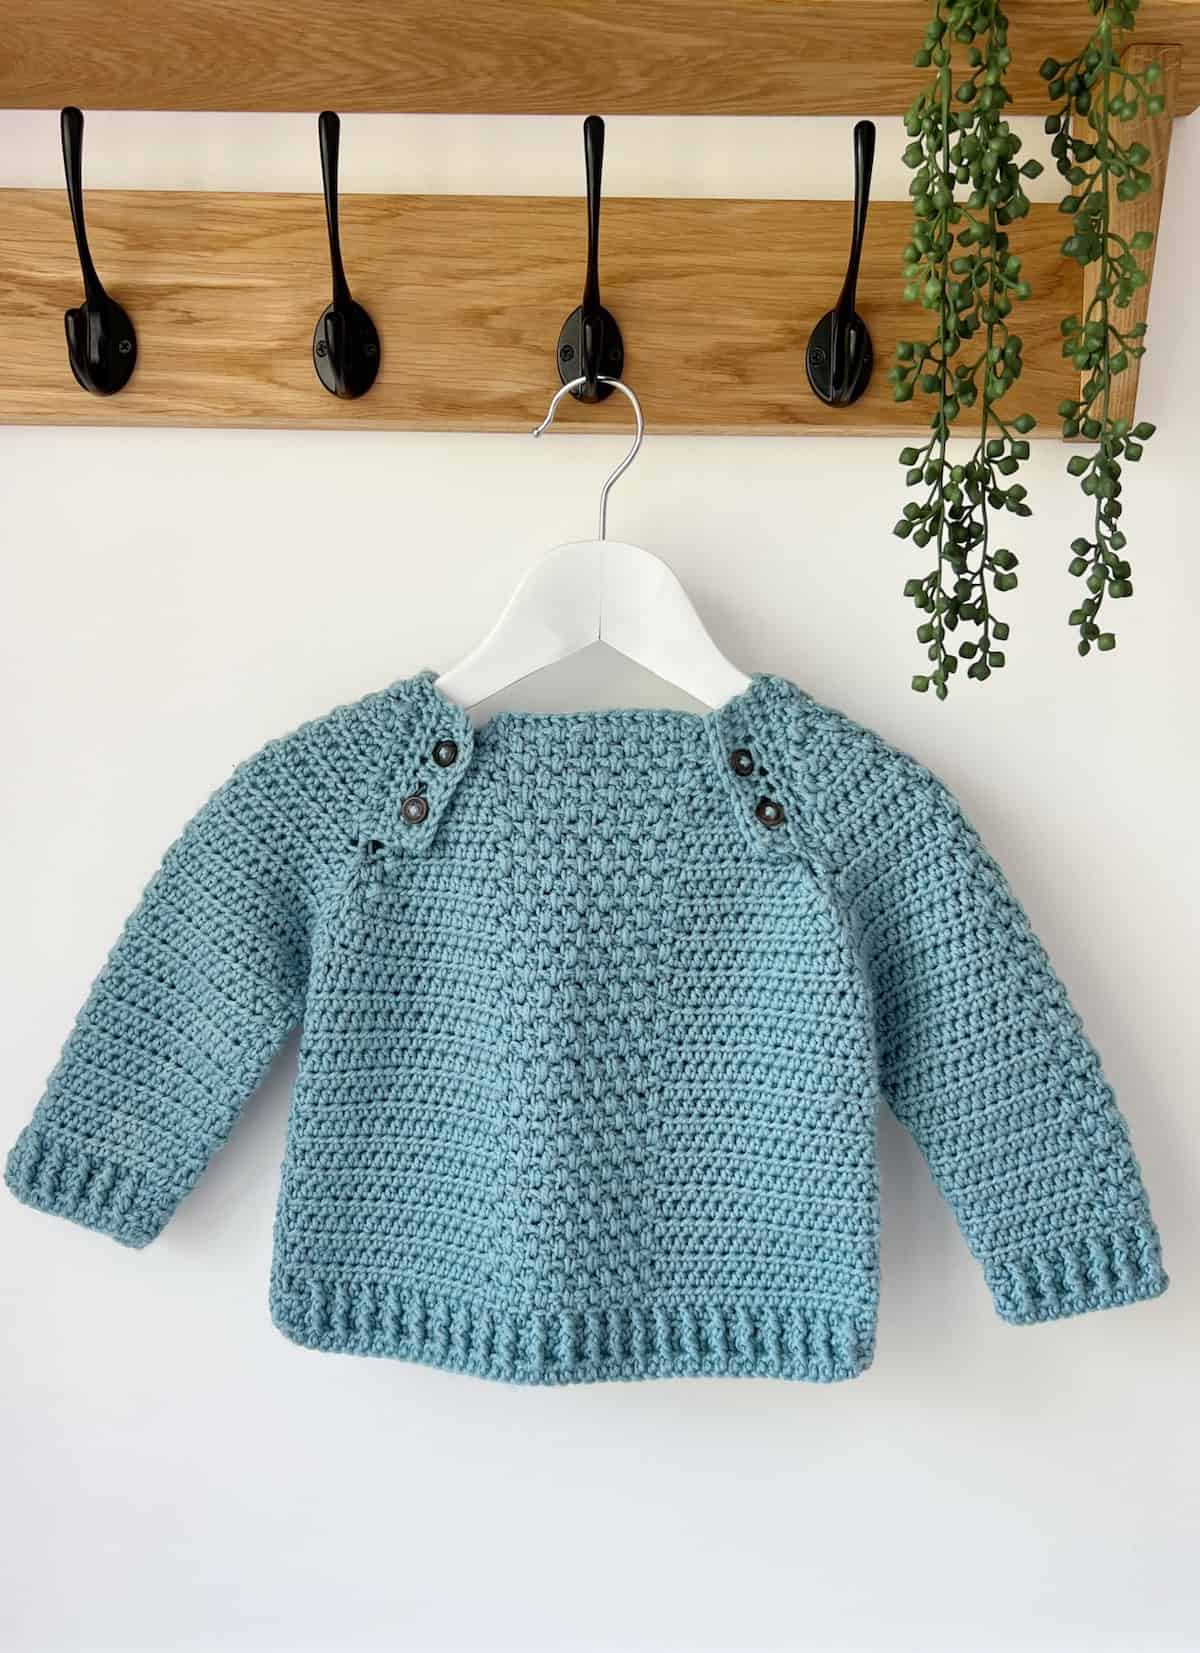 Baby crochet sweater in teal blue hanging up on a hook.